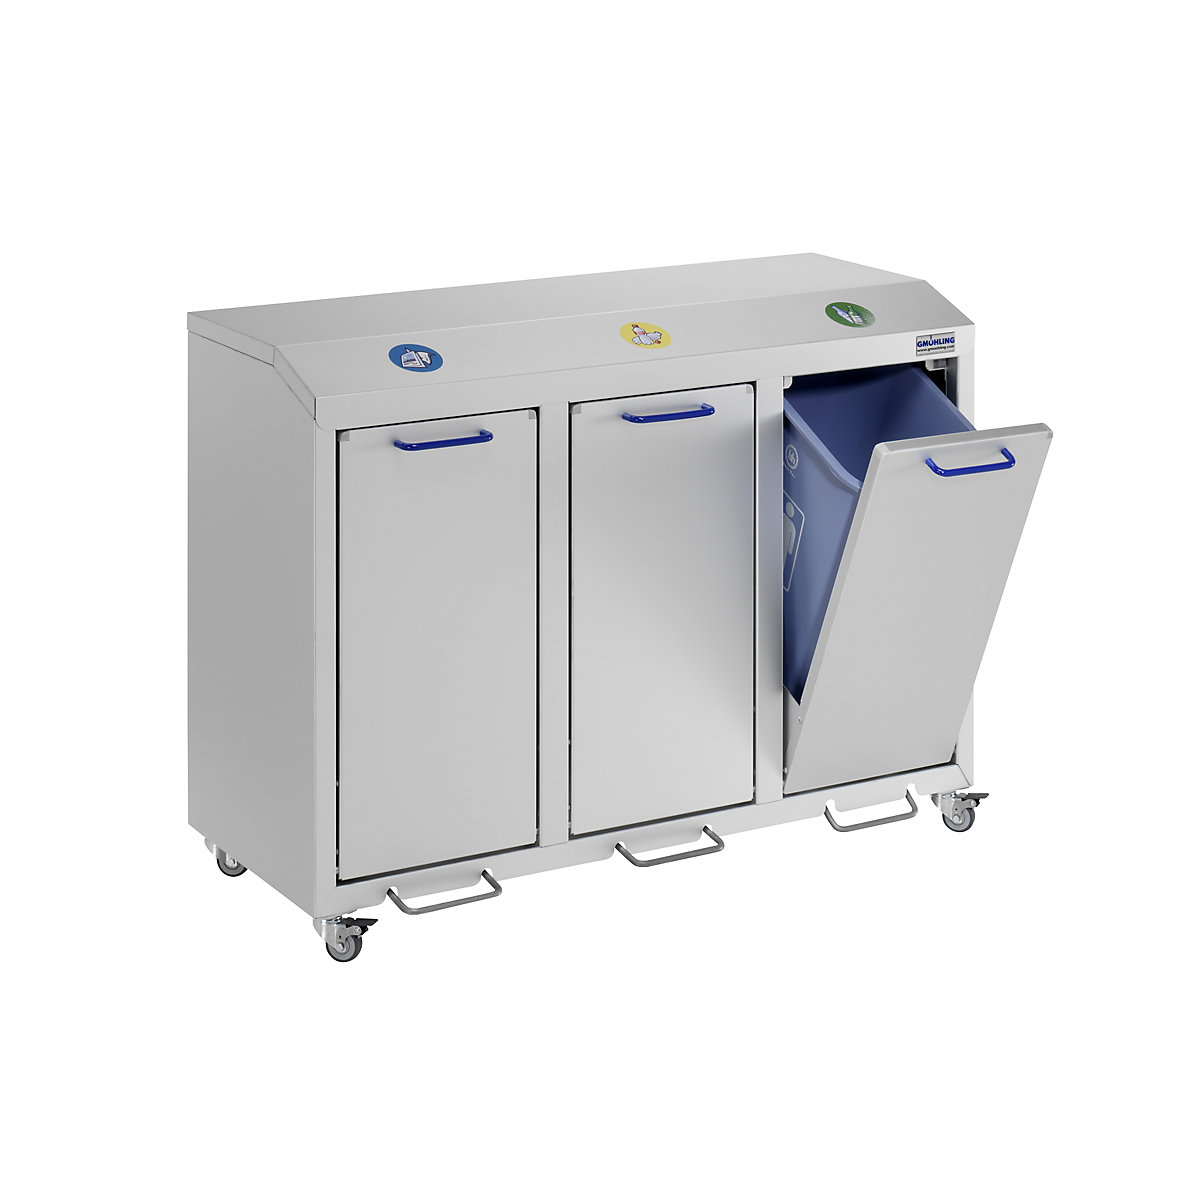 G®-COLLECT aluminium recyclable waste collector – Gmöhling